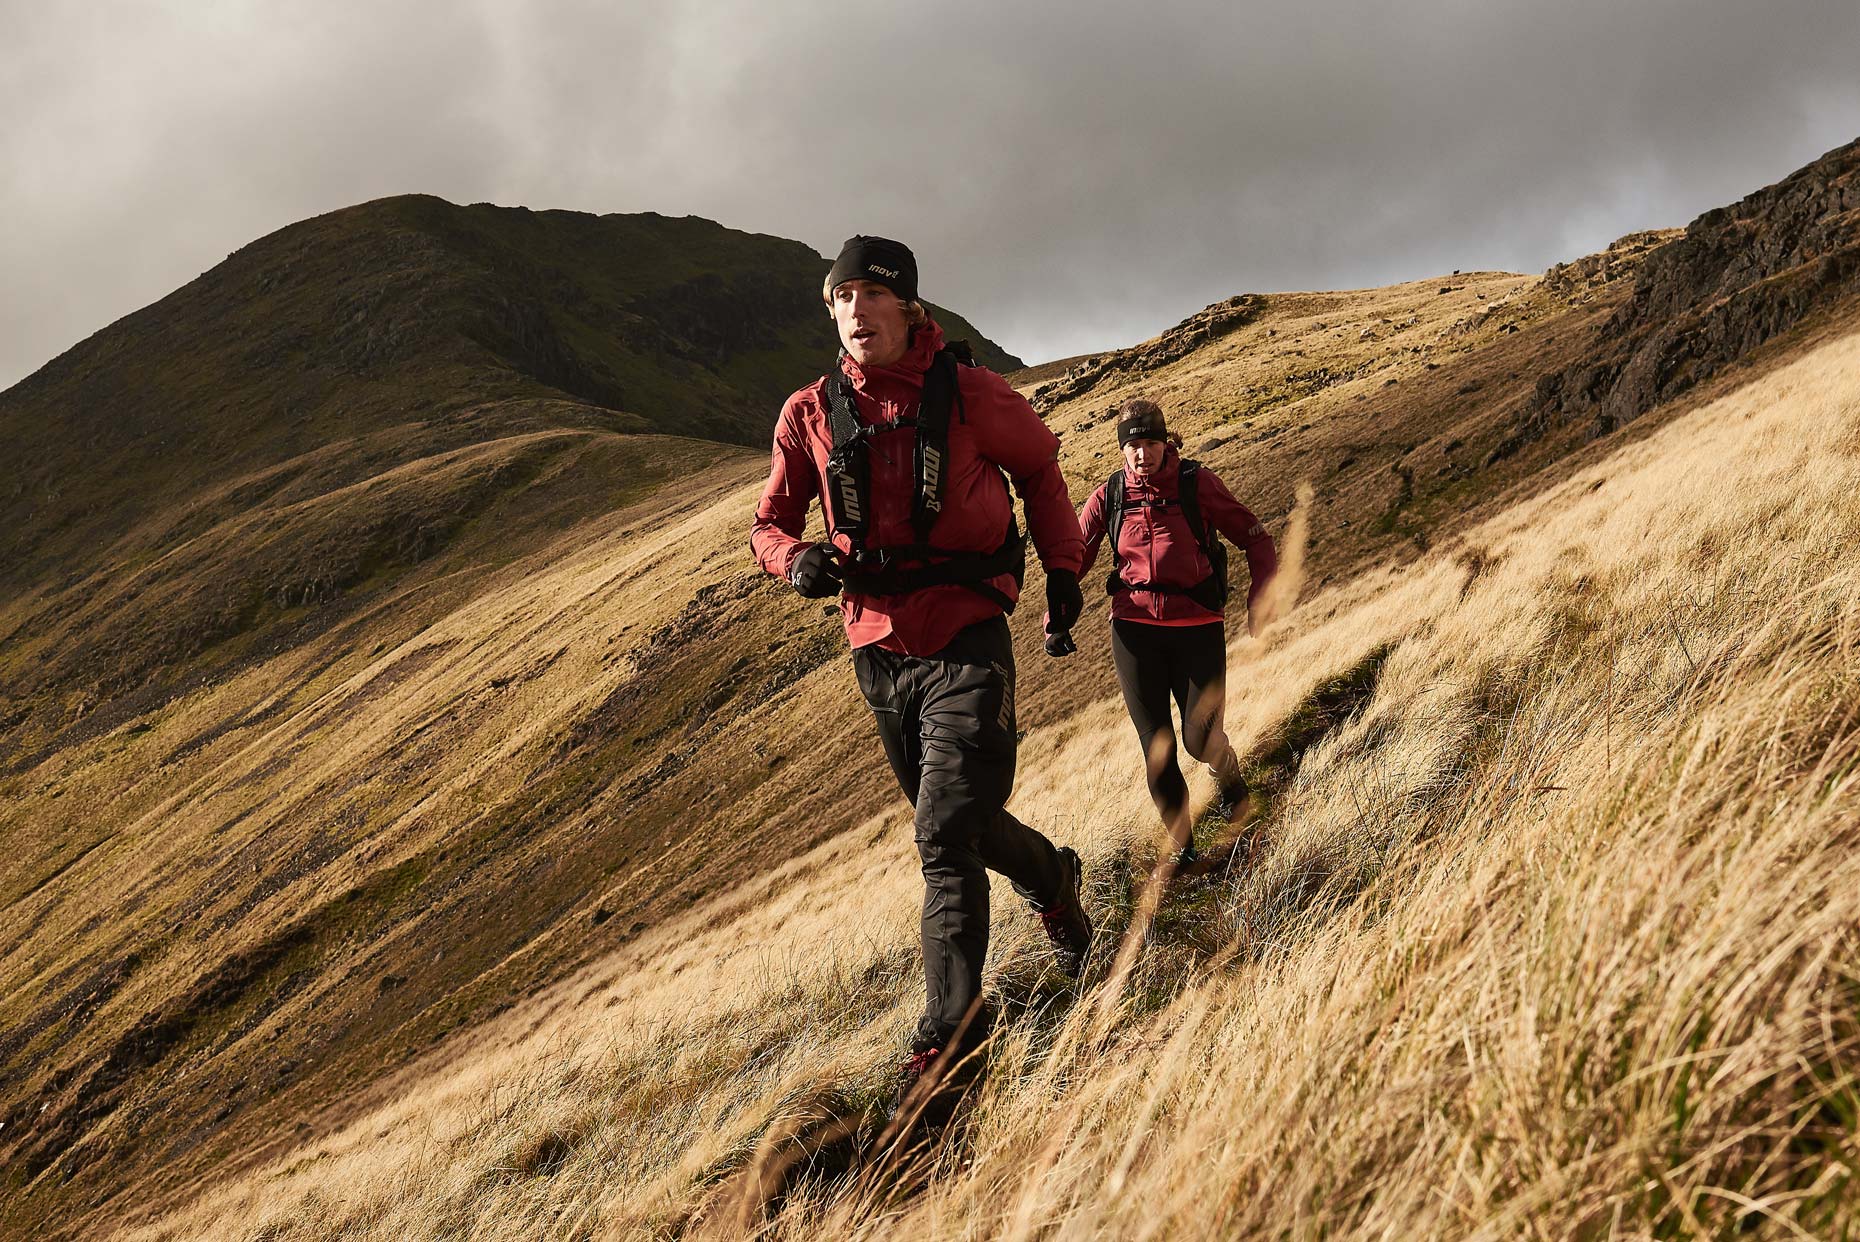 Inov8 athletes trail running in the lake district for Roclite photoshoot